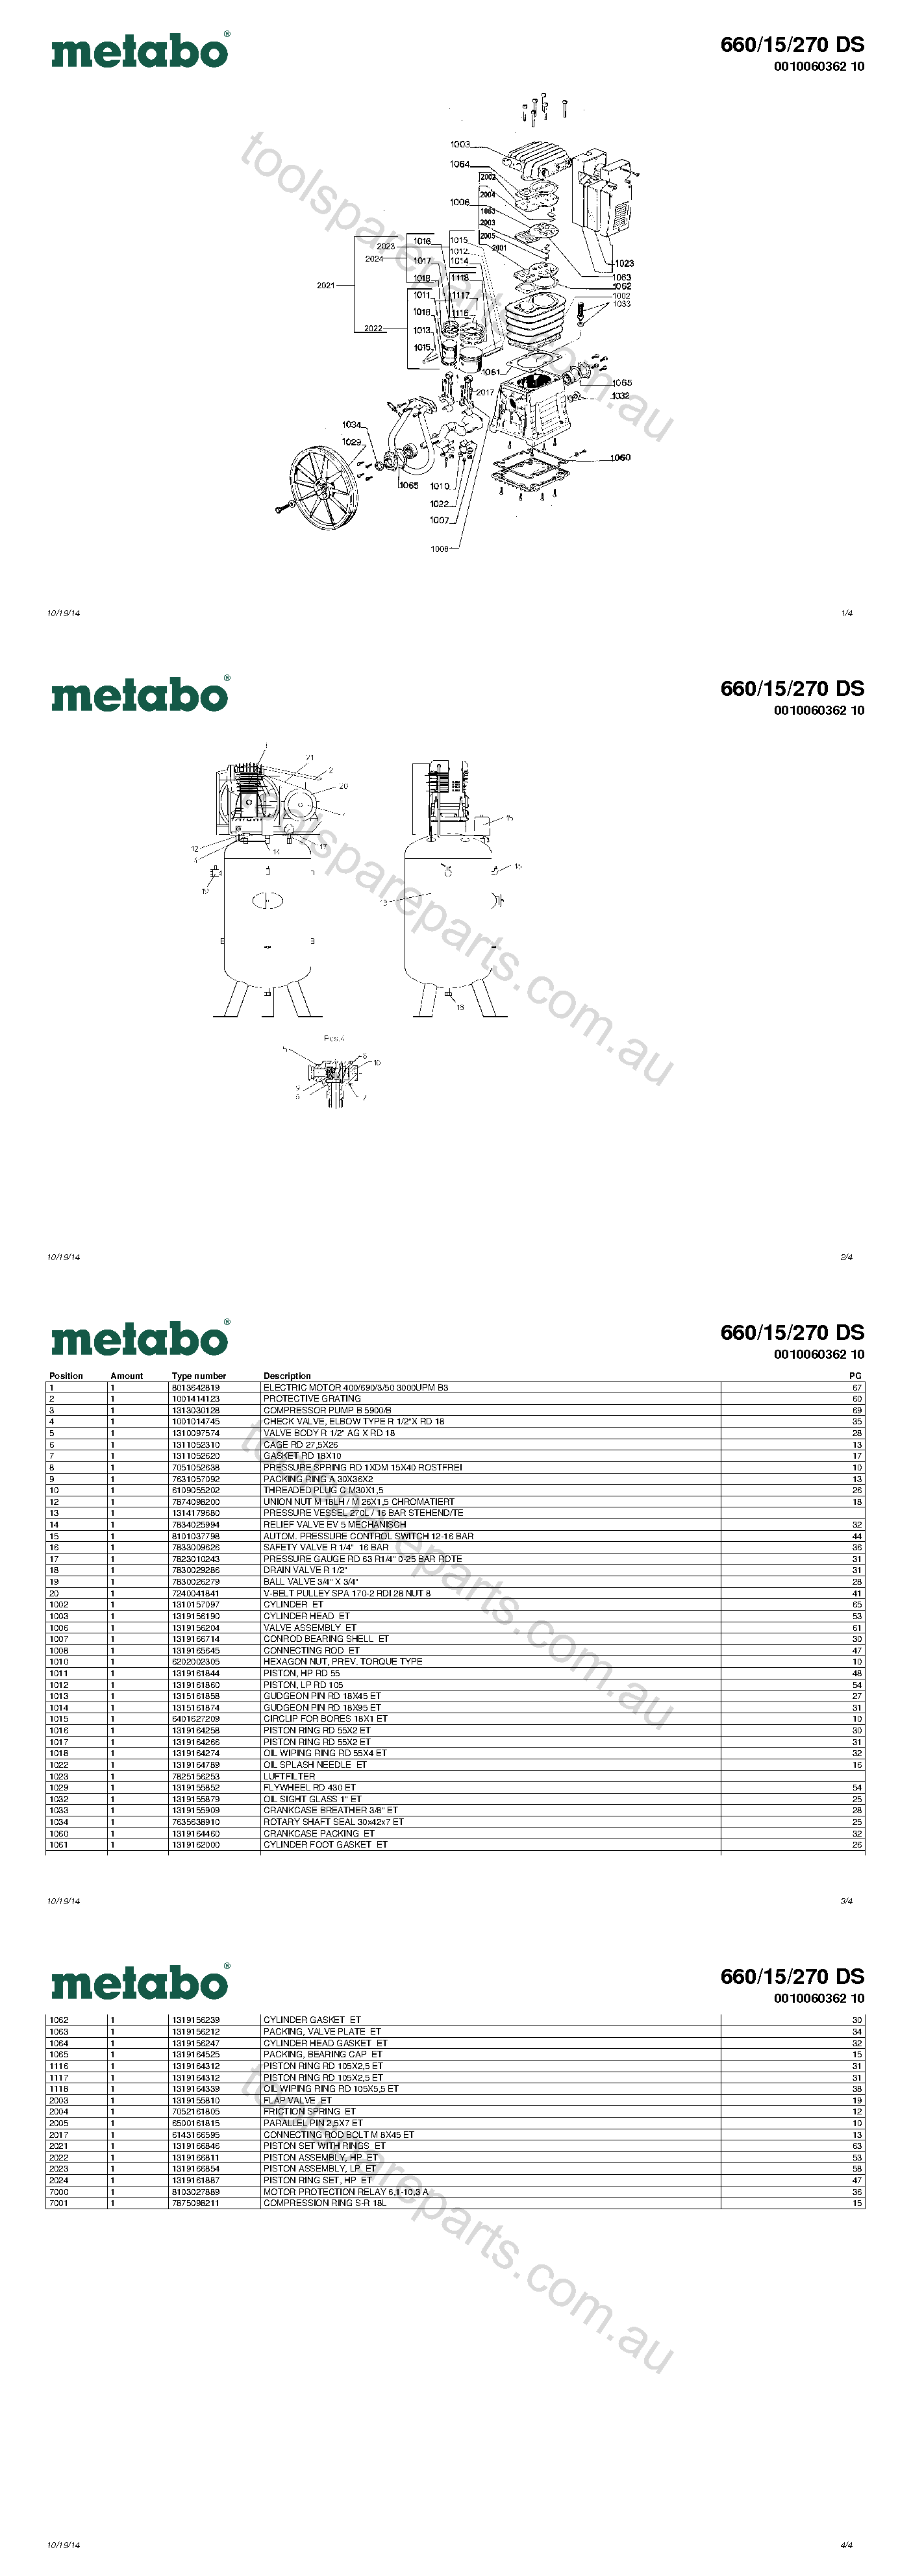 Metabo 660/15/270 DS 0010060362 10  Diagram 1